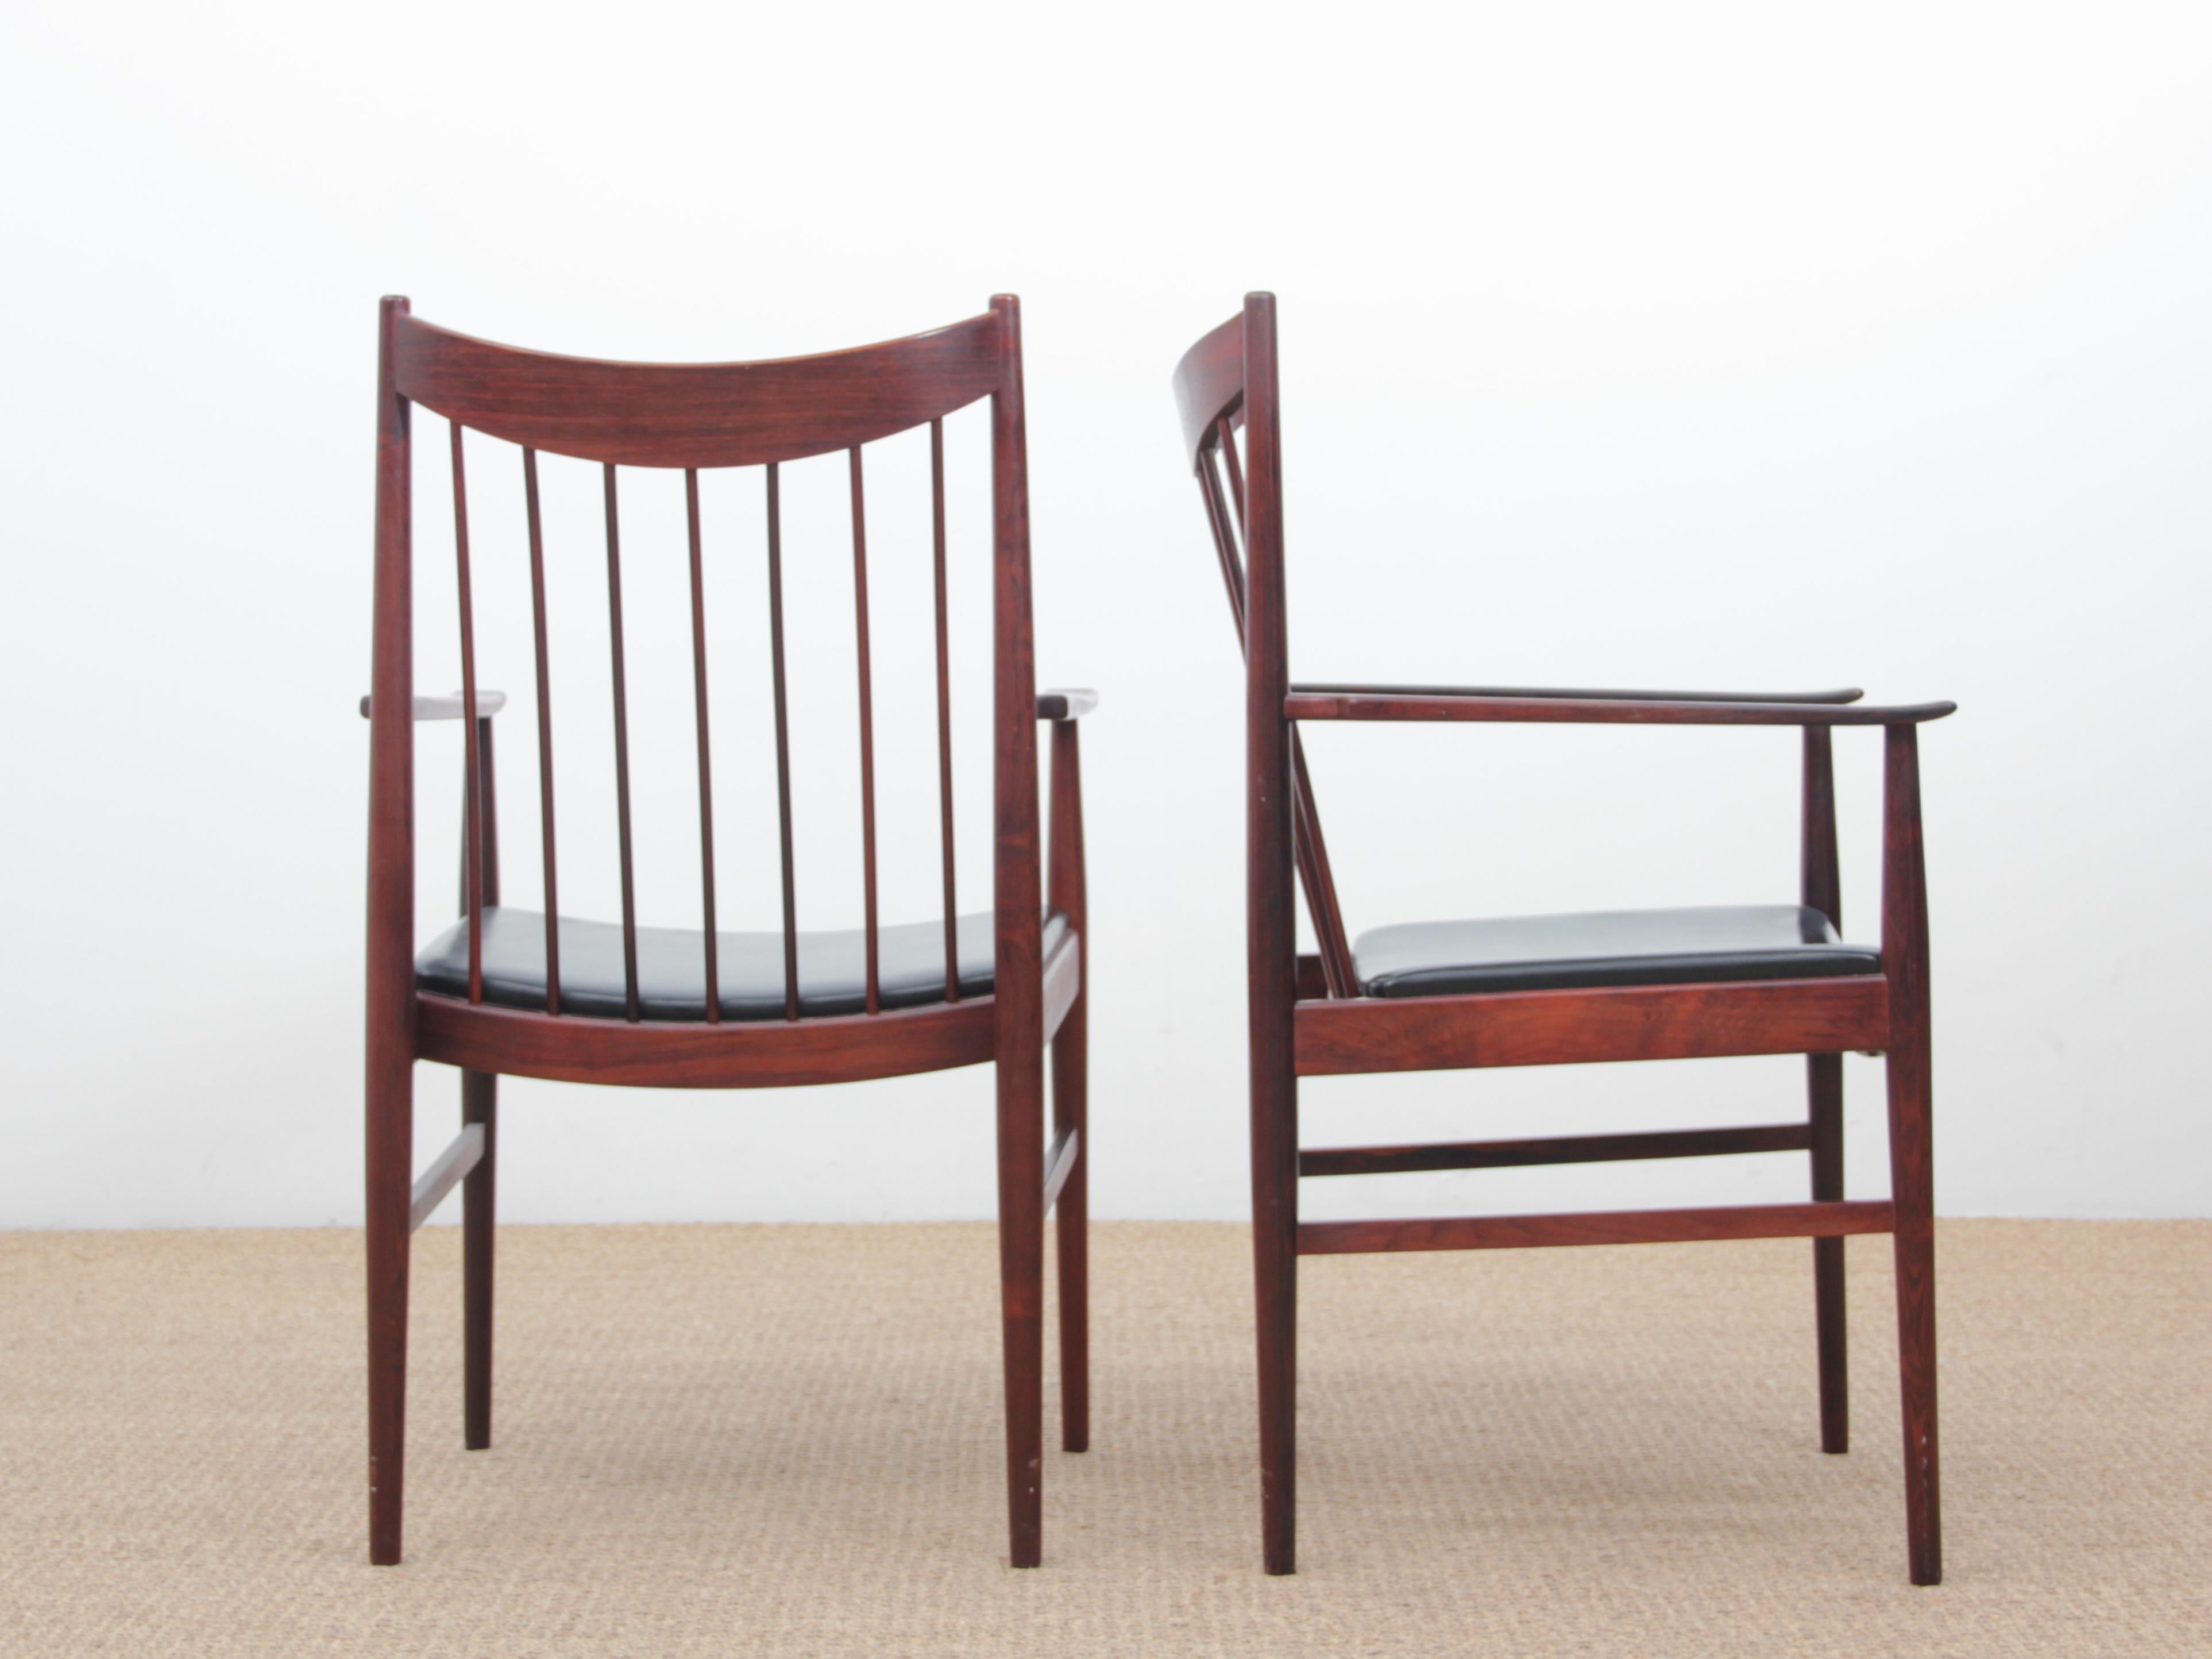 Mid-Century Modern Scandinavian pair of armchairs in rosewood by Arne Vodder for Sibast Furniture. Original seat in similar leather needed to be reupholstered. New upholstery on demand, leather or fabric: + €220 per chair. Delivery time 4